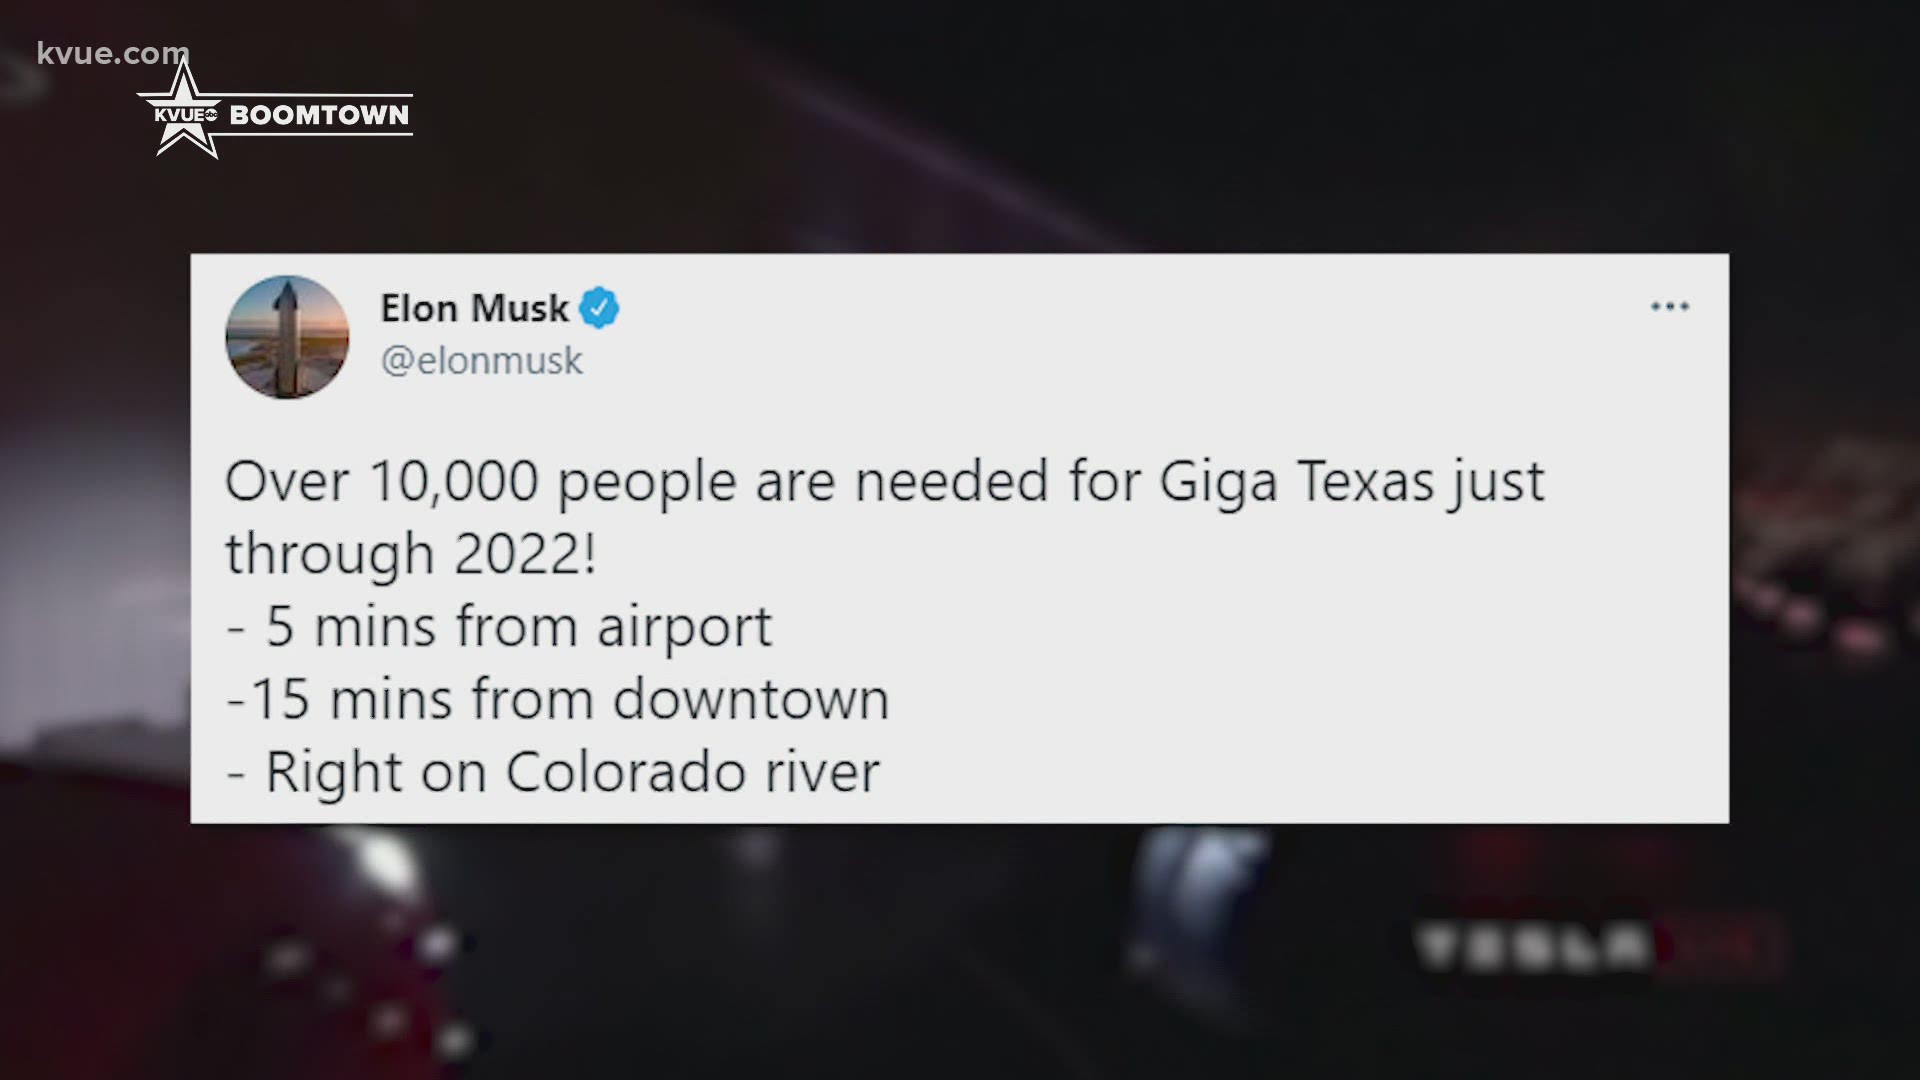 Elon Musk says the new Gigafactory plans to employ 10,000 people.